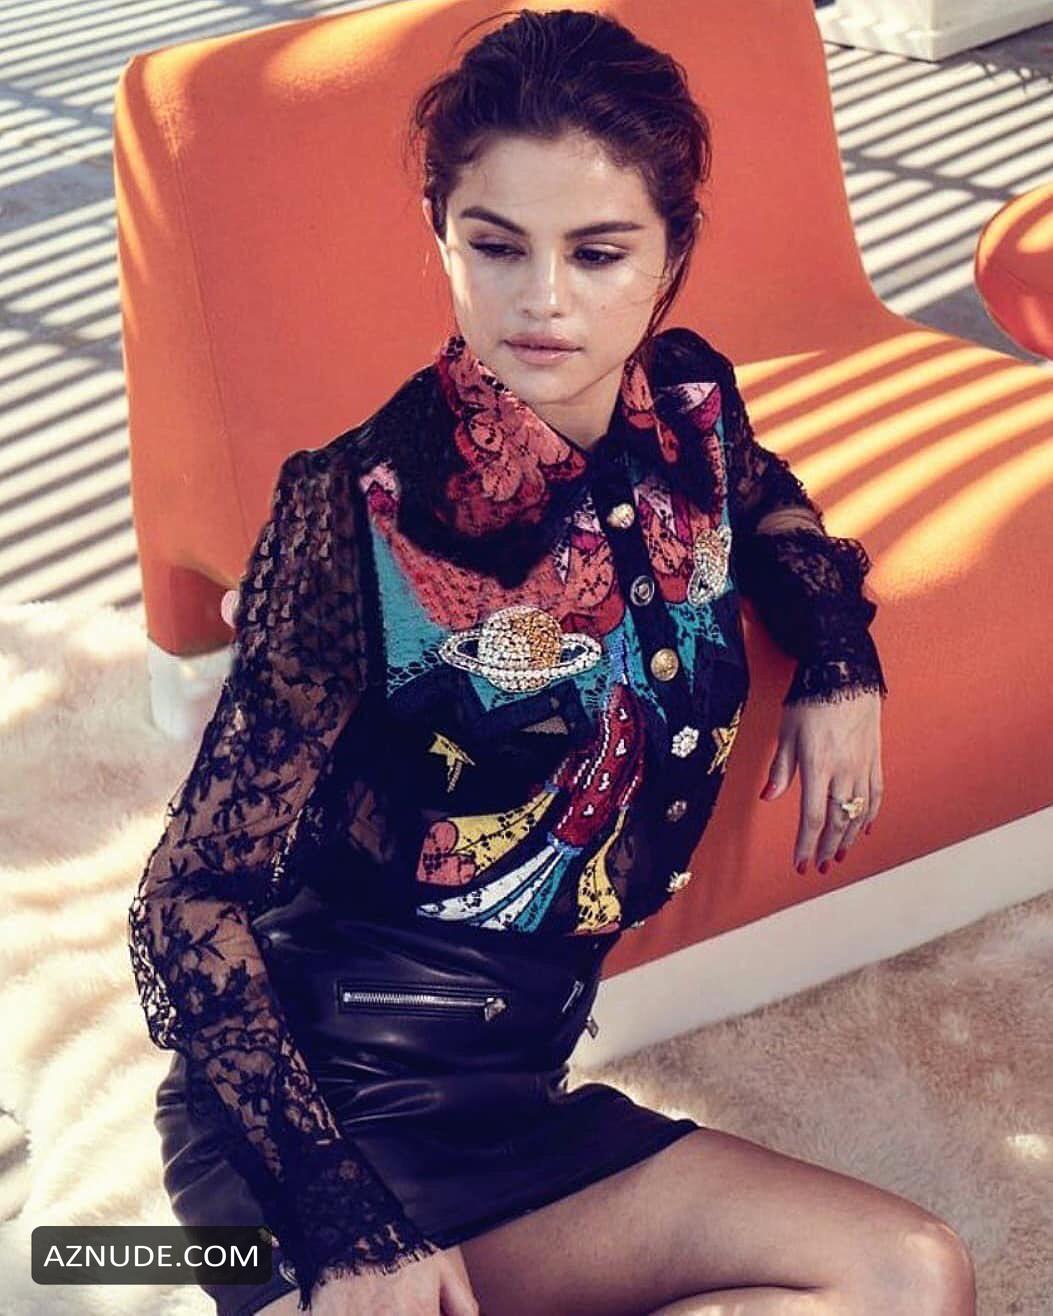 Selena Gomez Sexy Behind The Scenes Photos From A Famous Phil Poynter S Photoshoot For Instyle